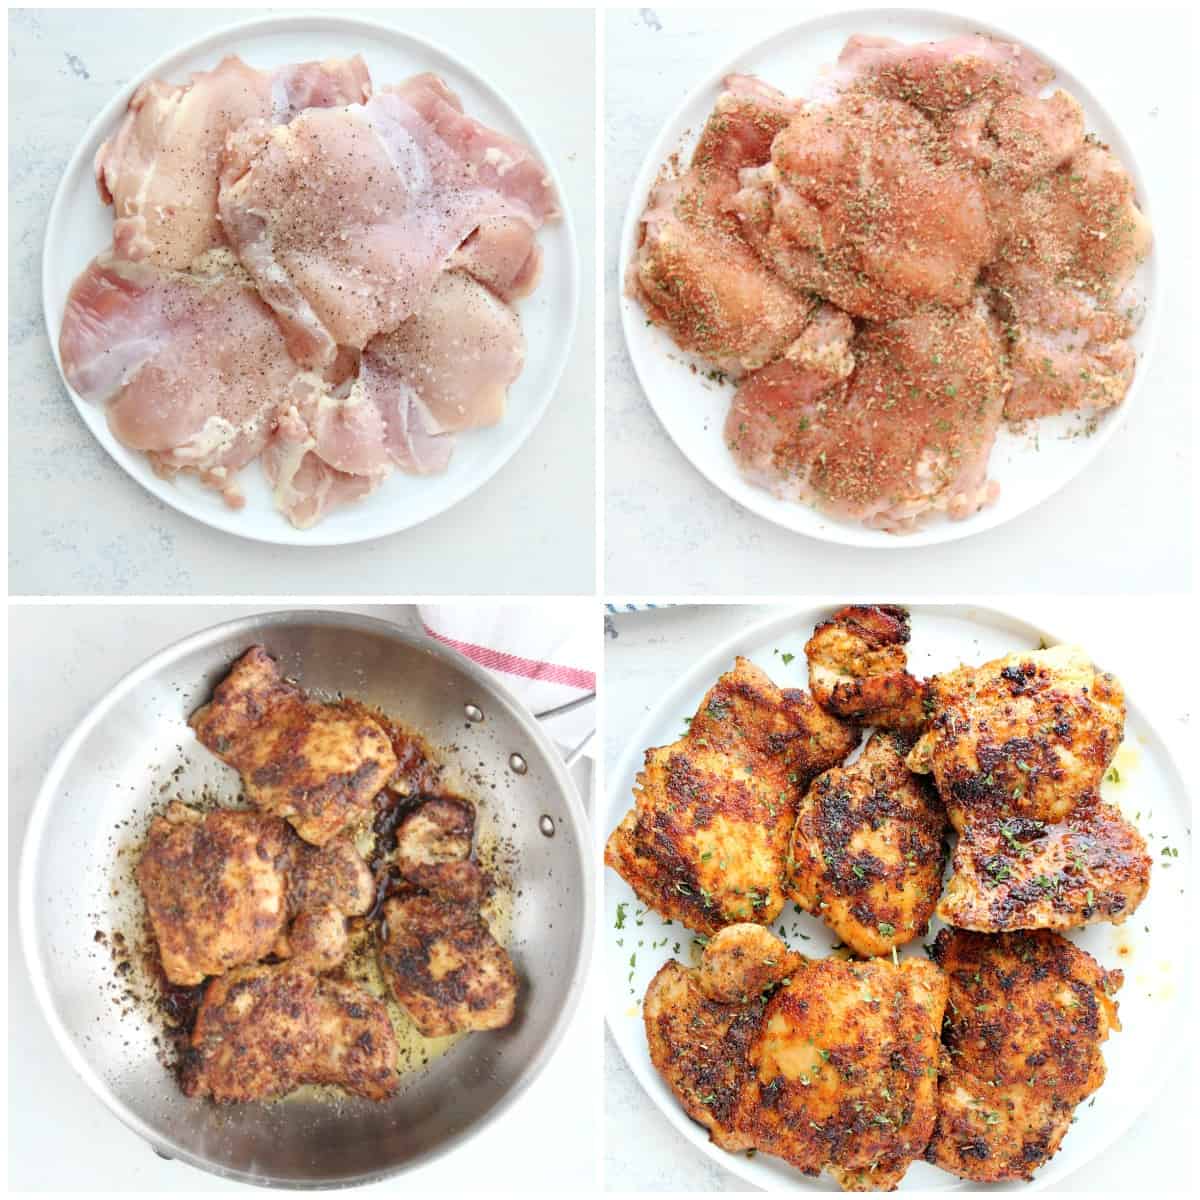 Seasoned and pan fried chicken thighs.